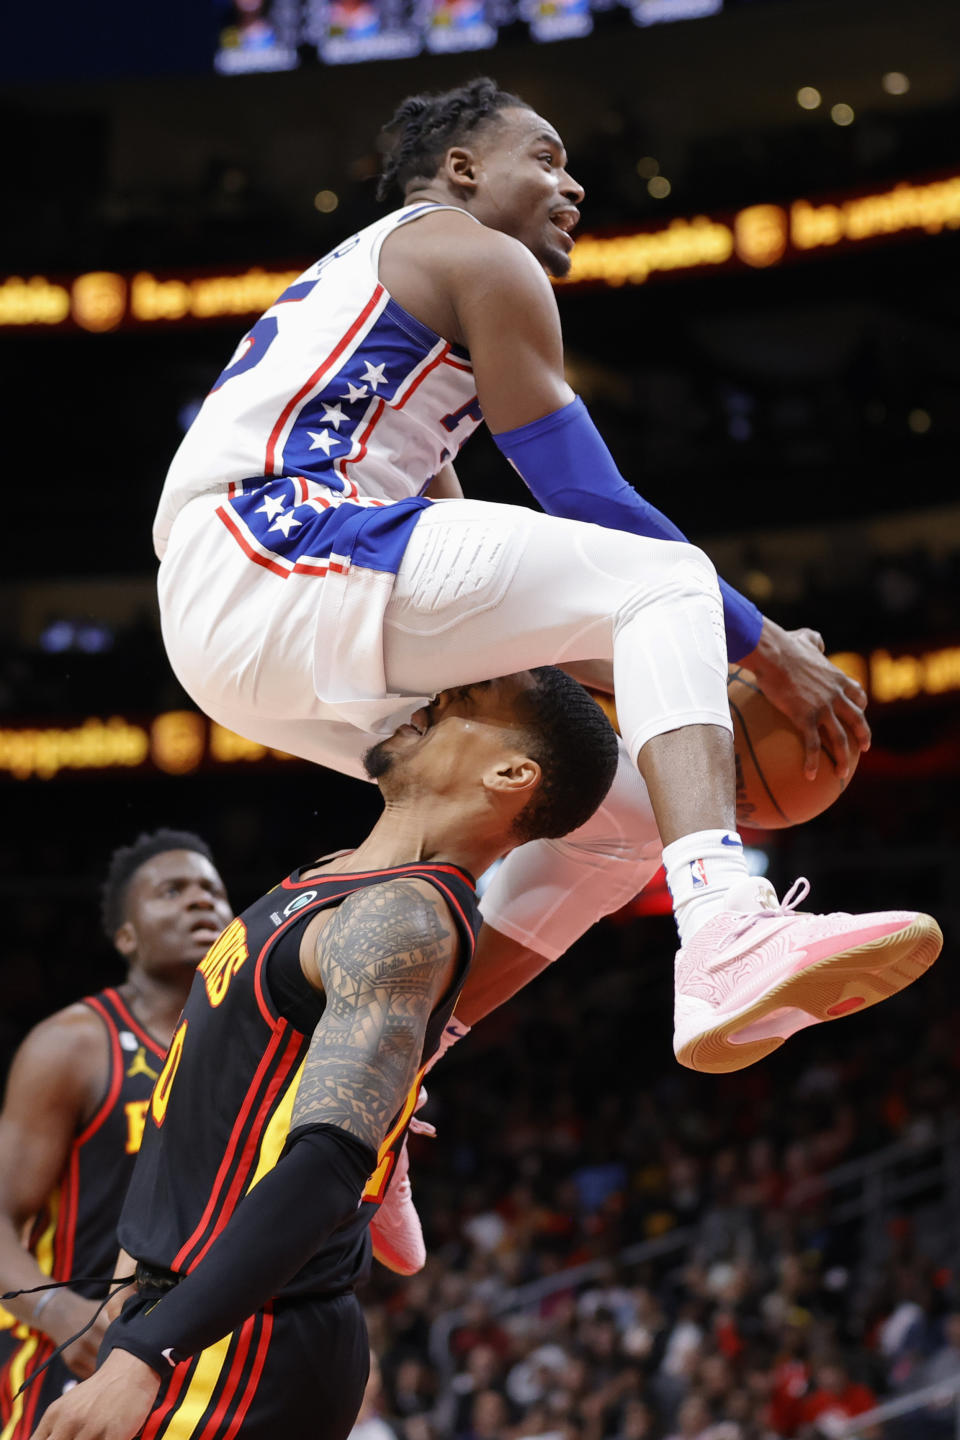 Philadelphia 76ers forward Danuel House Jr. goes to the basket above Atlanta Hawks forward John Collins during the second half of an NBA basketball game Friday, April 7, 2023, in Atlanta. Collins was called for a foul. (AP Photo/Alex Slitz)